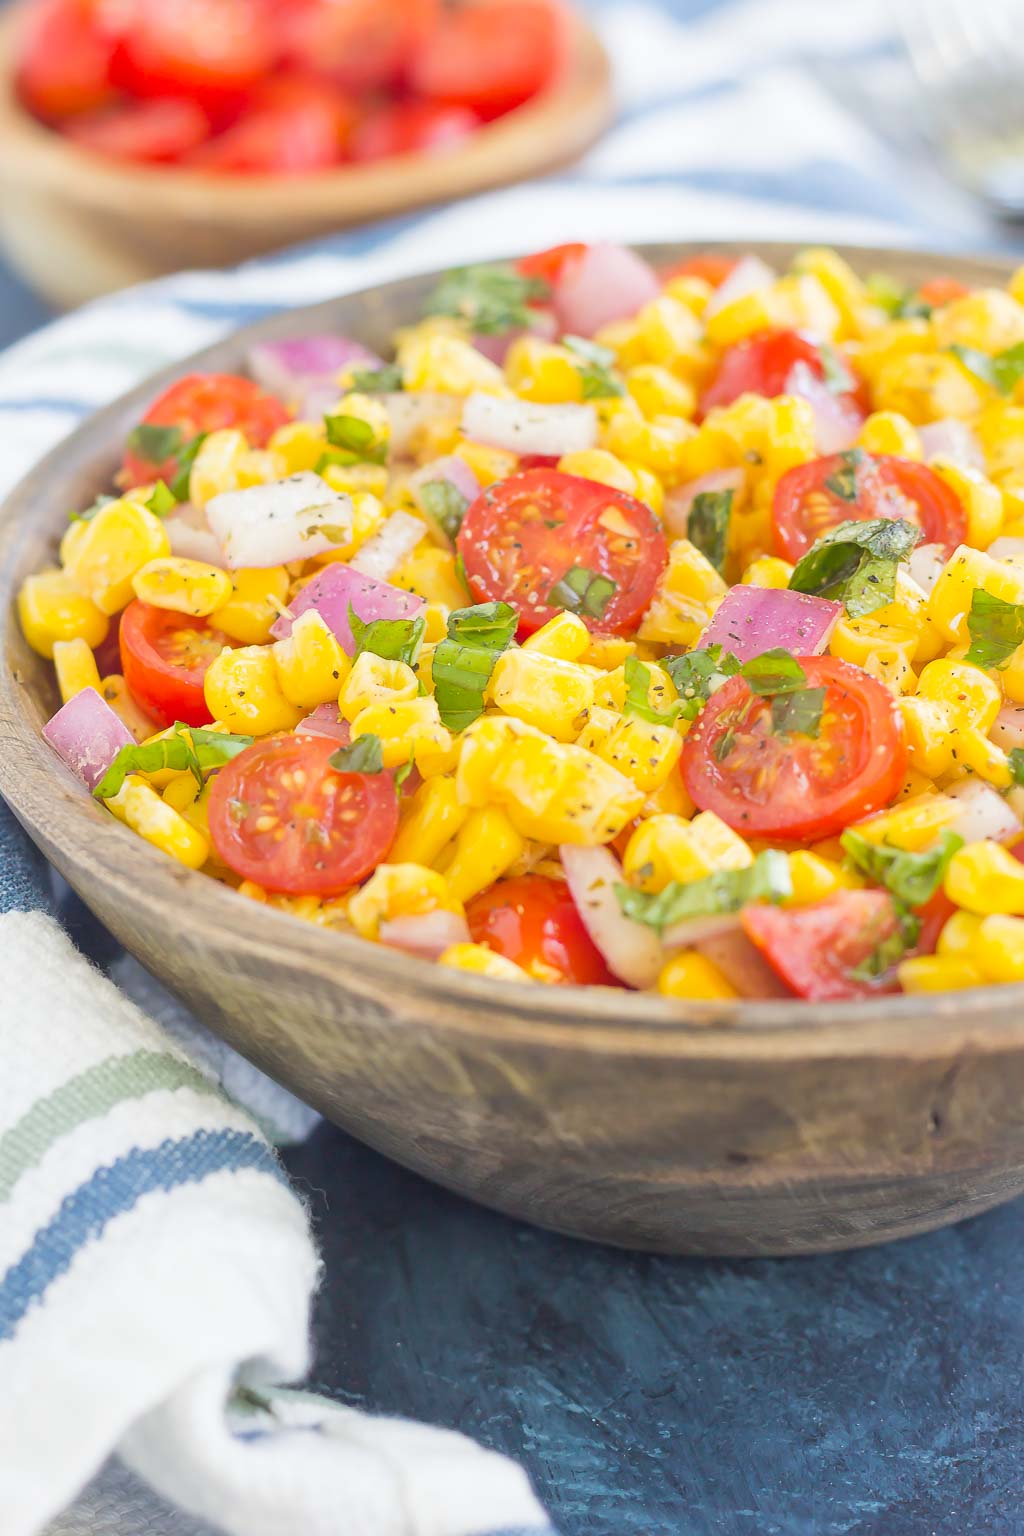 With fresh corn cut straight from the cob, cherry tomatoes, spices, and a light dressing, this Corn and Tomato Salad is perfect for a summer lunch or dinner!